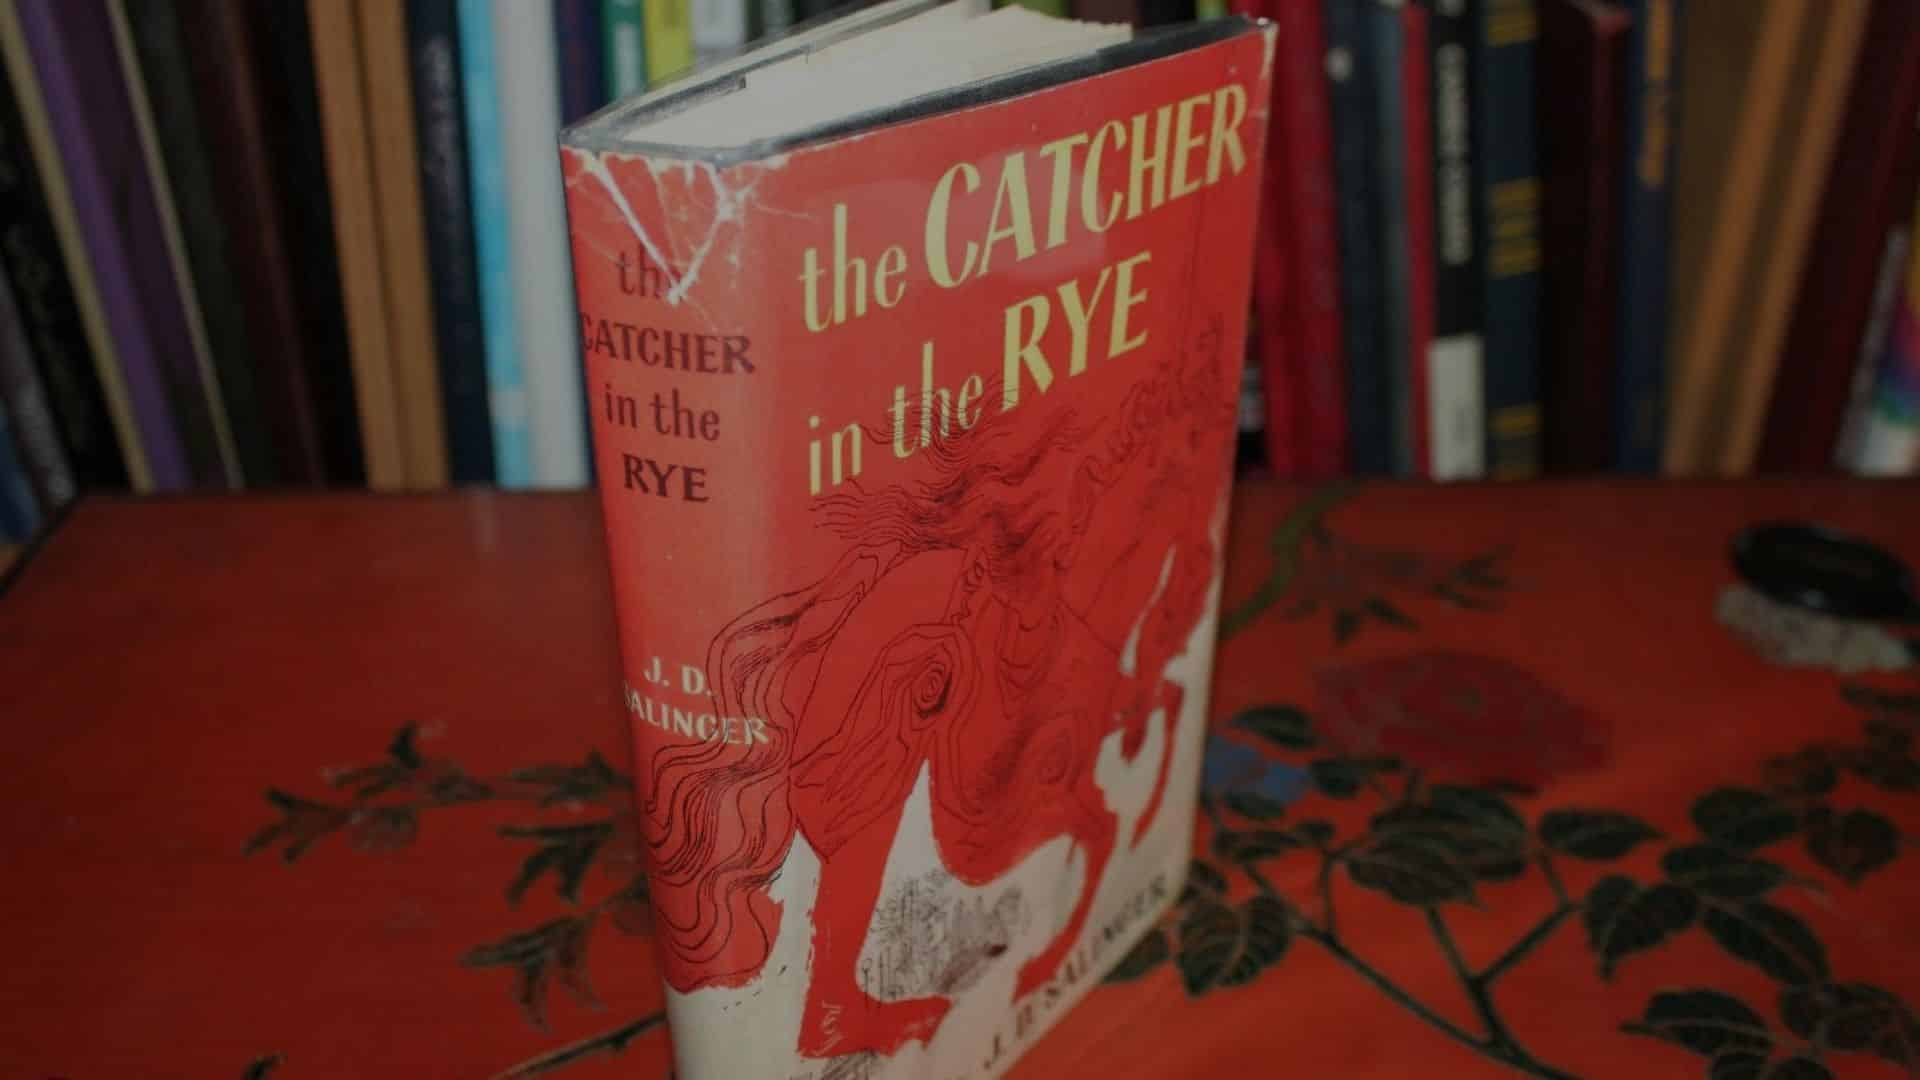 The Catcher In The Rye By J.D. Salinger: Why You Should Read This Book?